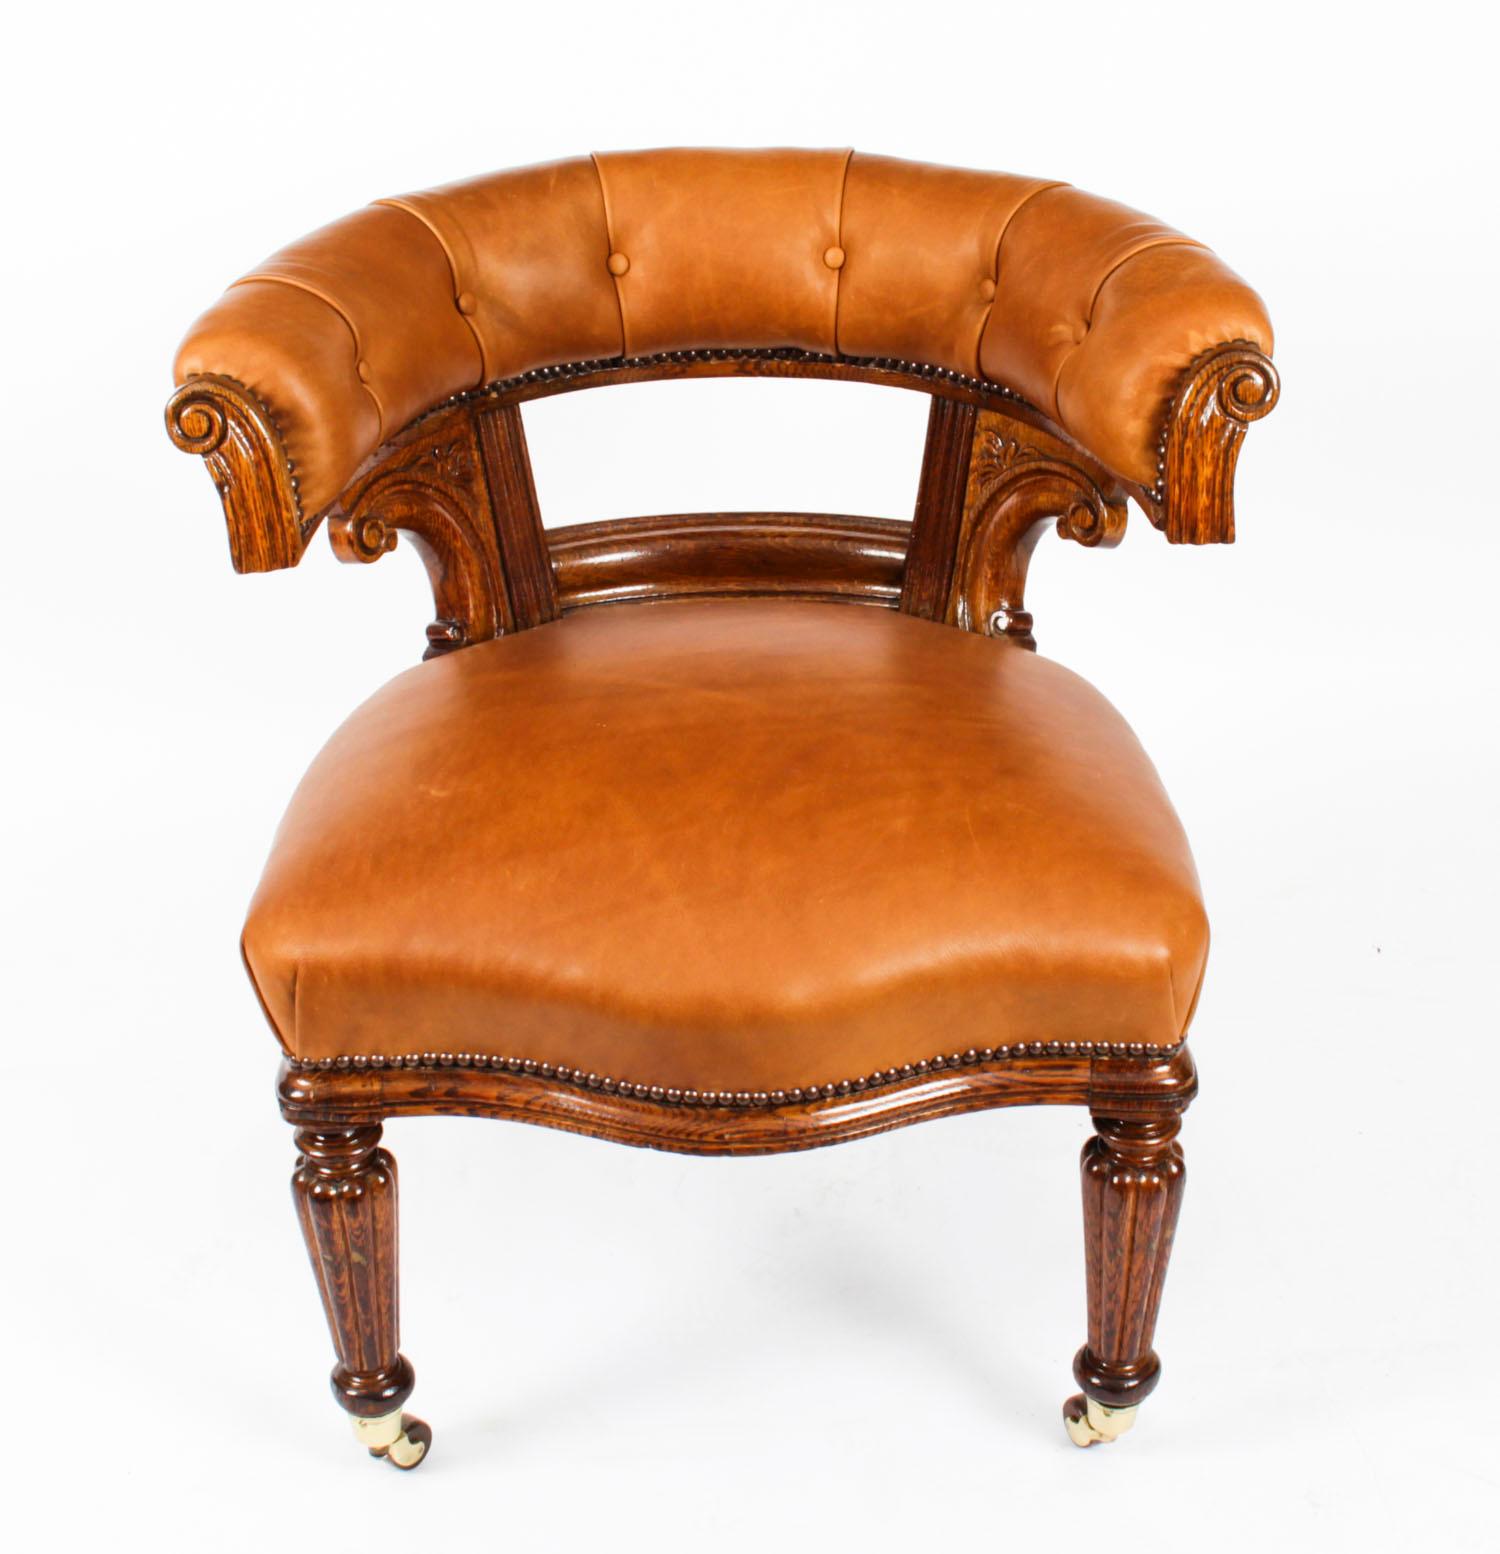 This is a very comfortable, antique Victorian oak desk chair c.1880 in date.

It is made of oak, has beautiful hand carved decoration and sumptuous tan leather upholstery.

The chair is raised on turned tapered and reeded front legs.

It will